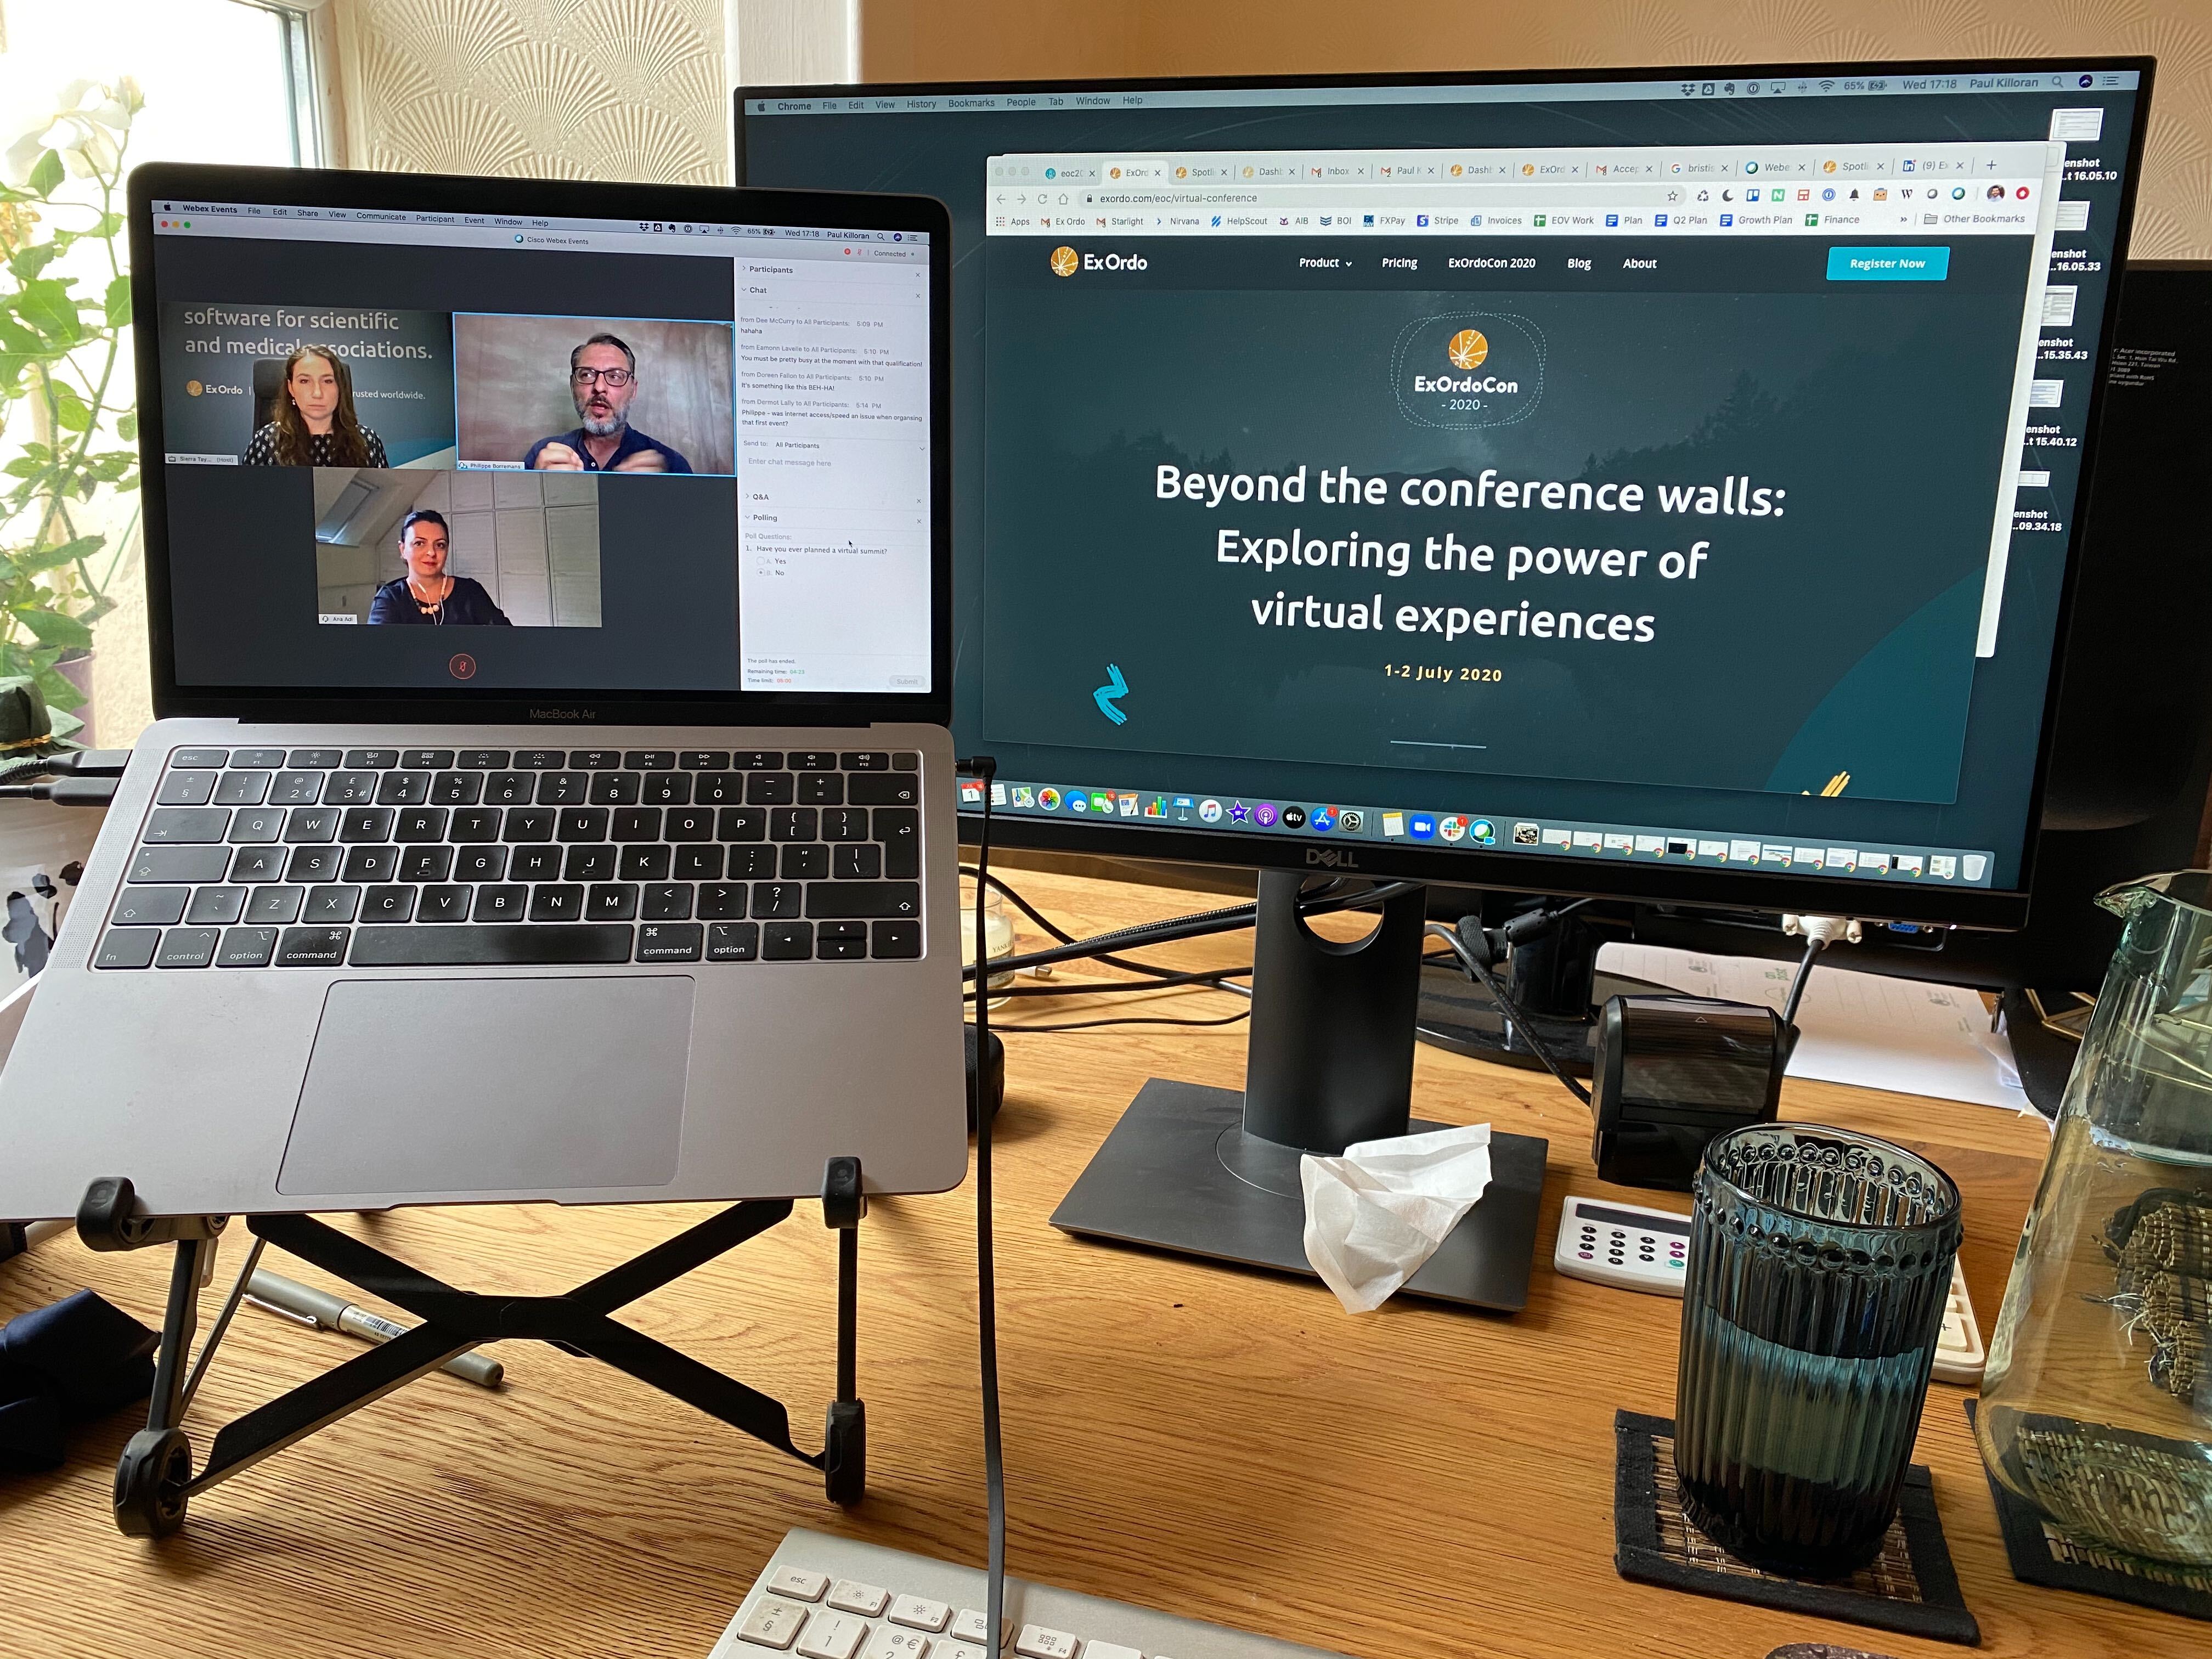 Image showing a remote work set up and one of the speaker sessions from ExOrdoCon 2020.